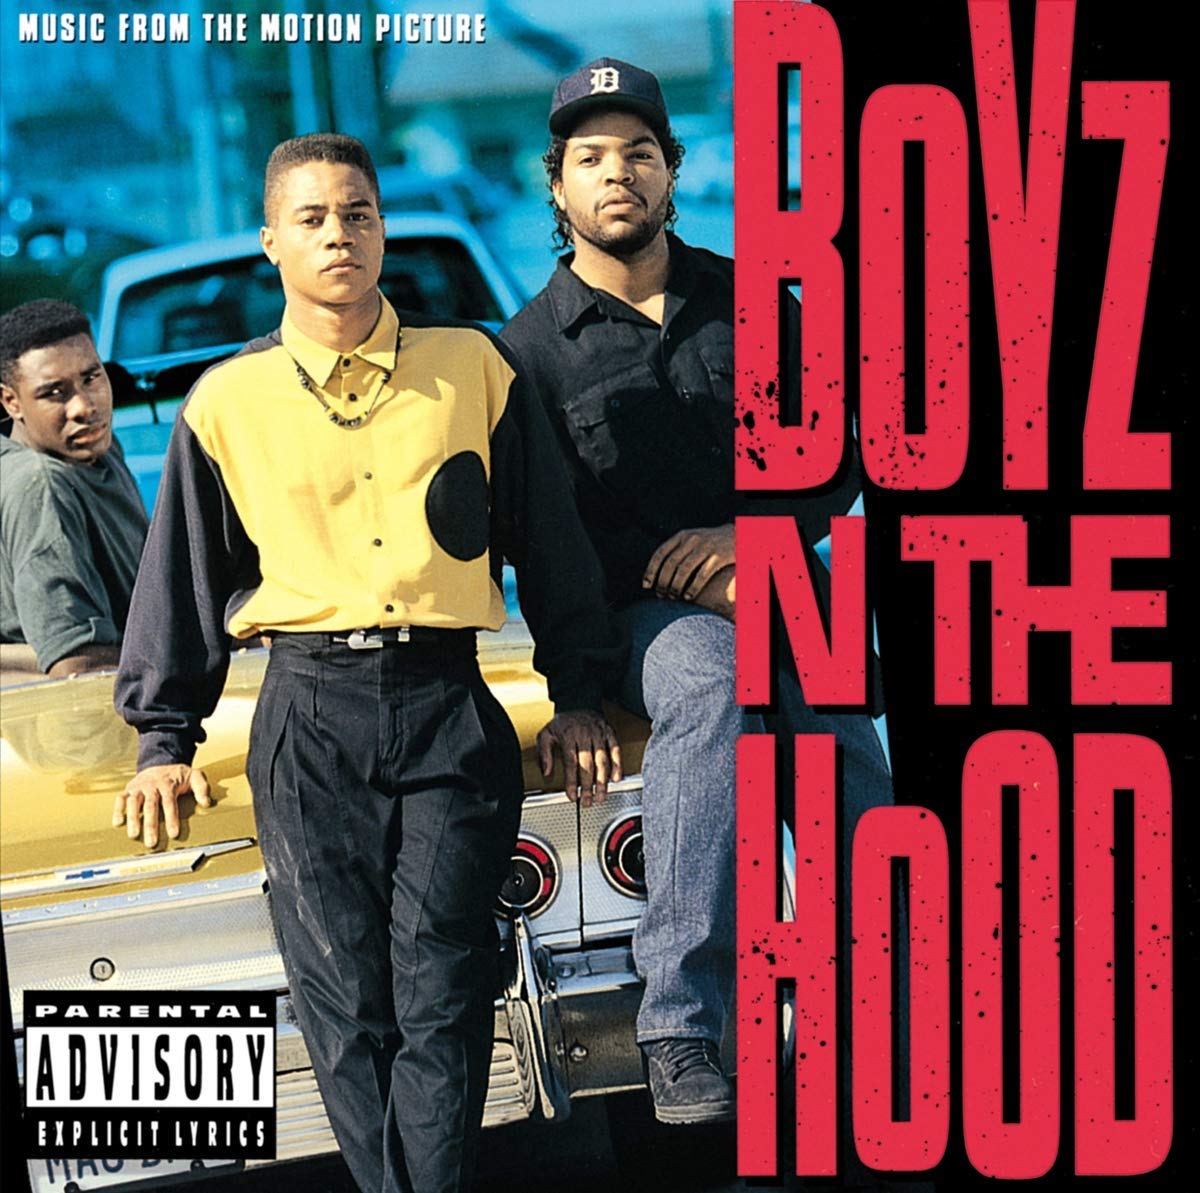 The "Boyz N The Hood" Soundtrack Was Released 30 Years Ago Today